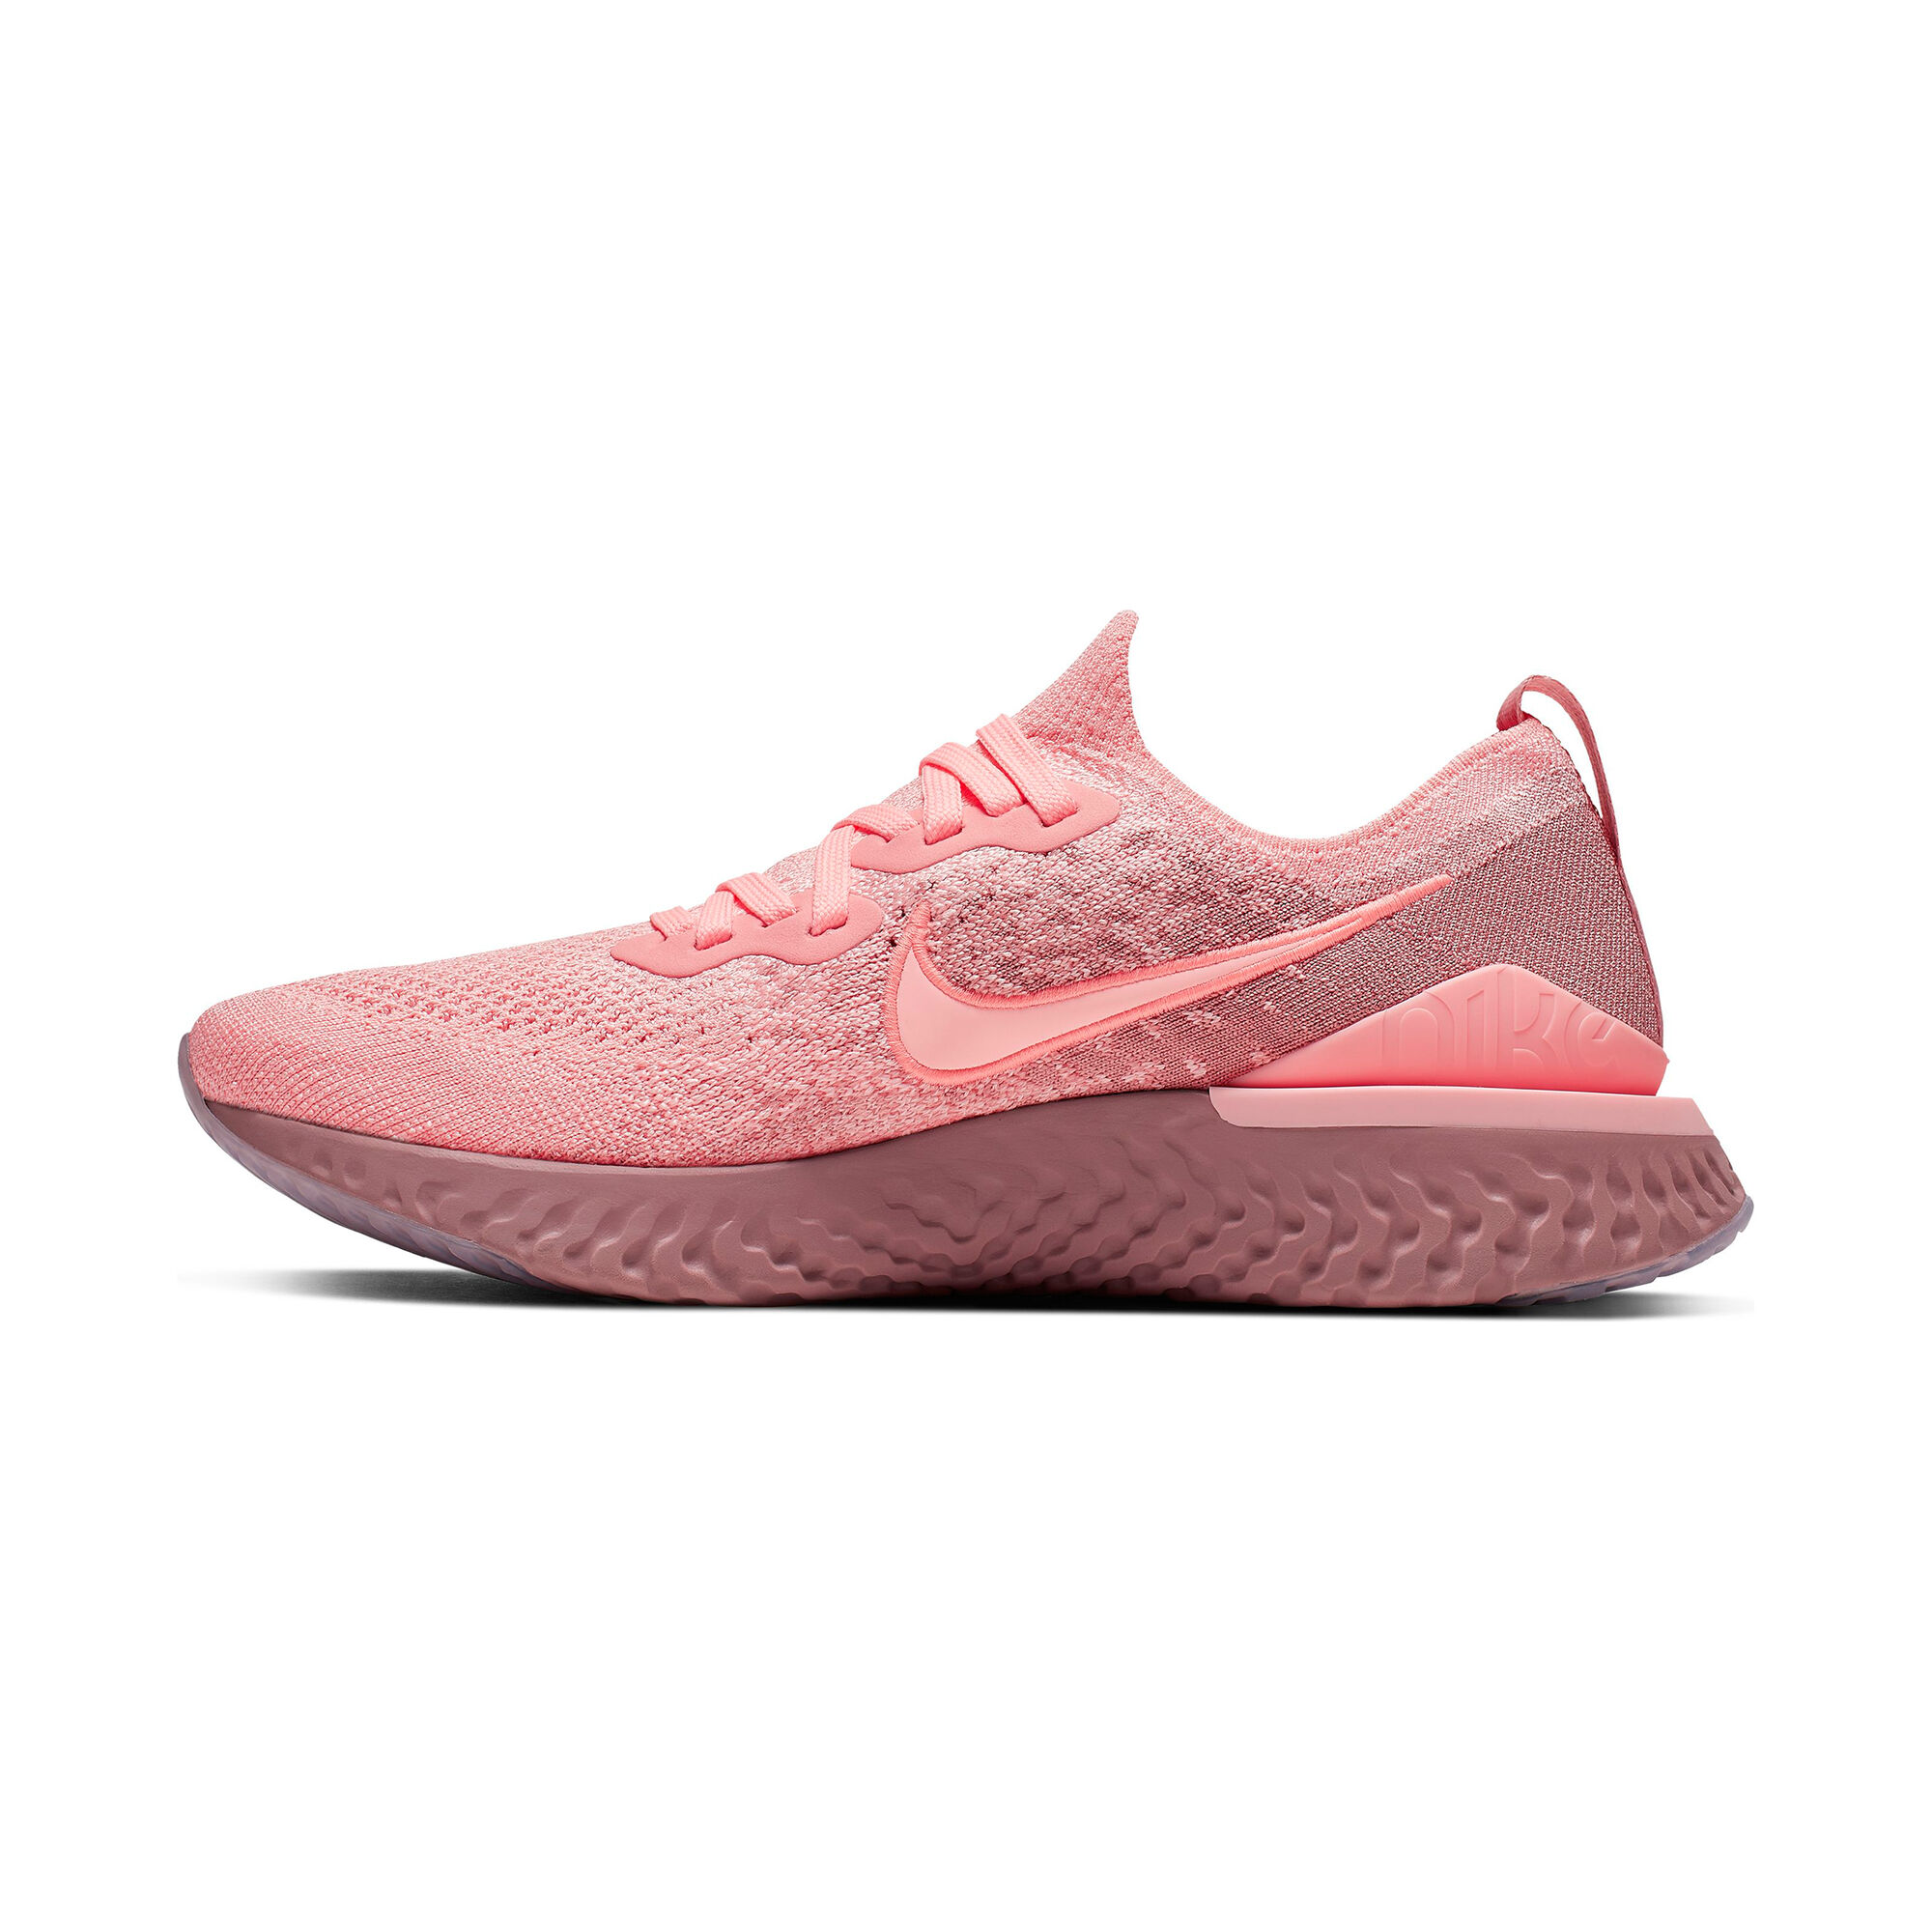 Epic React Flyknit 2 Zapatilla Neutral Mujeres - Coral, Rosa compra online | Running